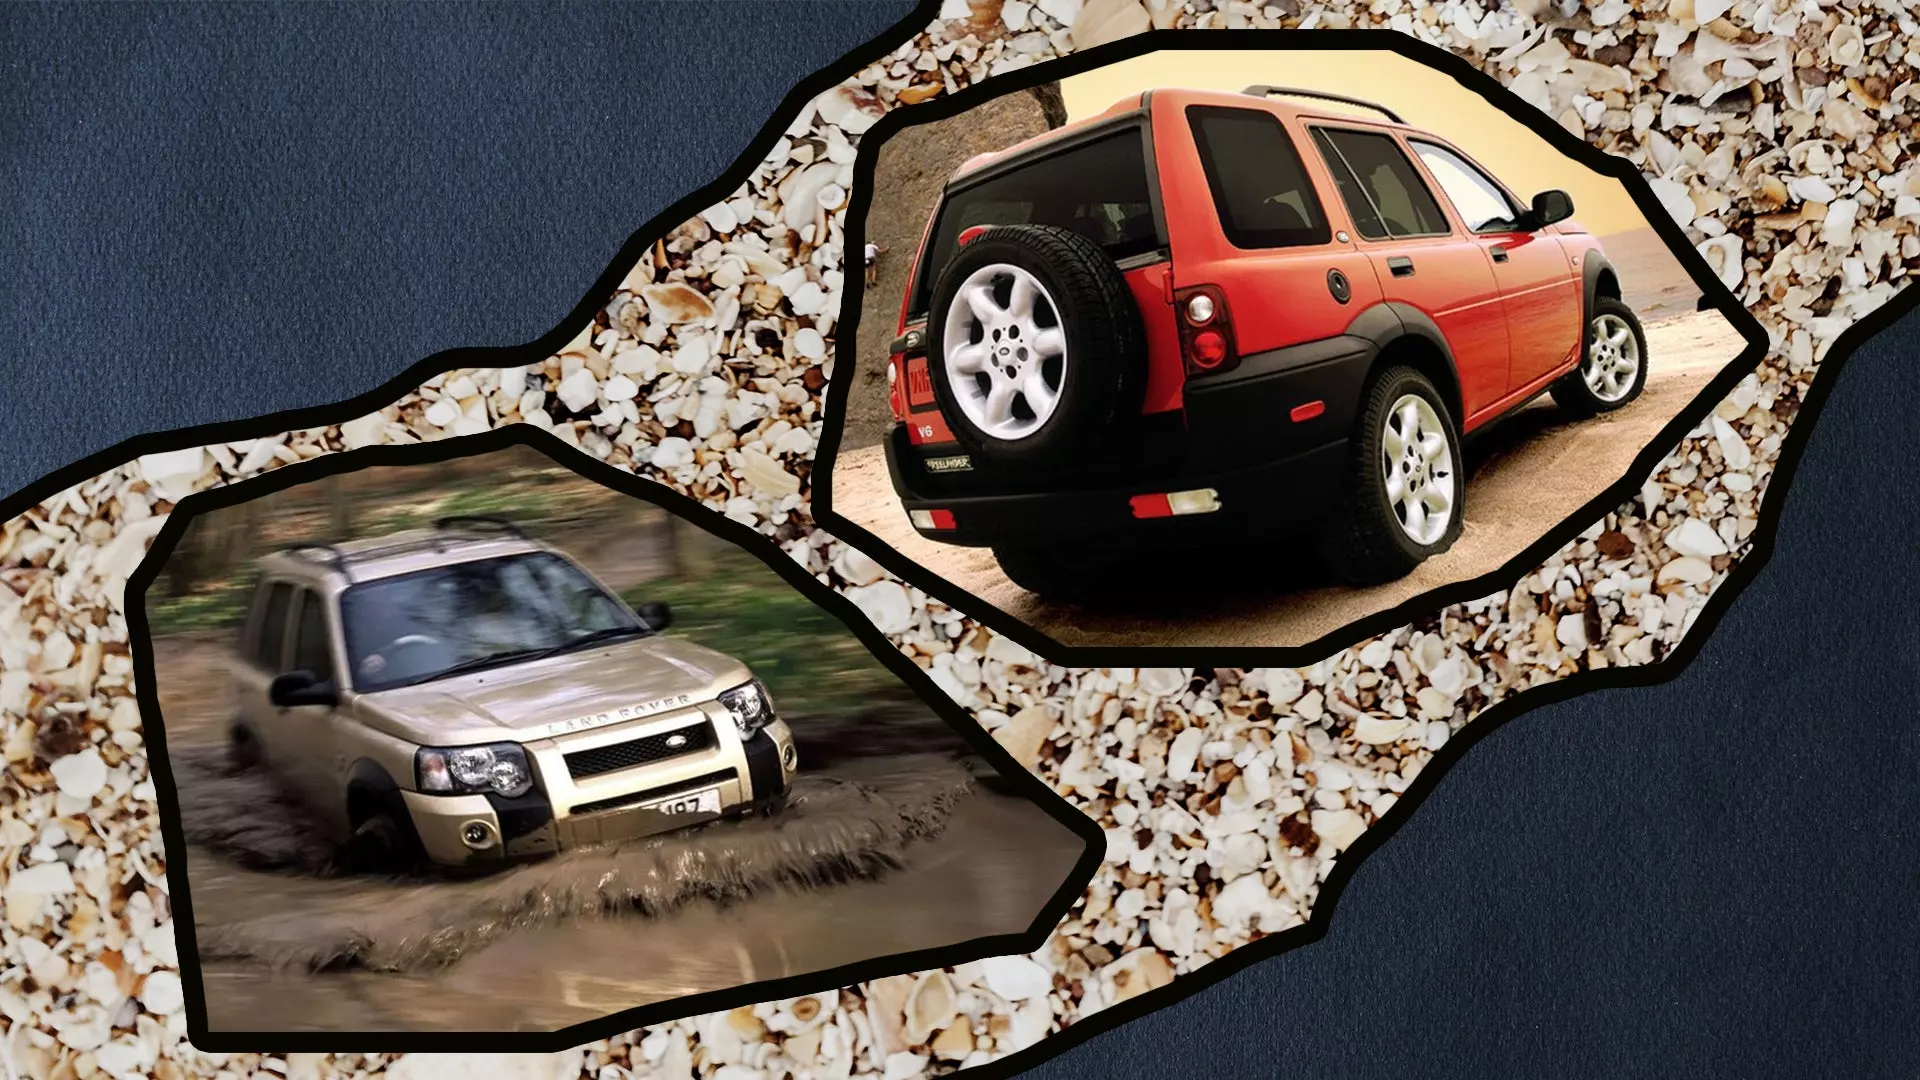 In Defense of the Land Rover Freelander | Autance